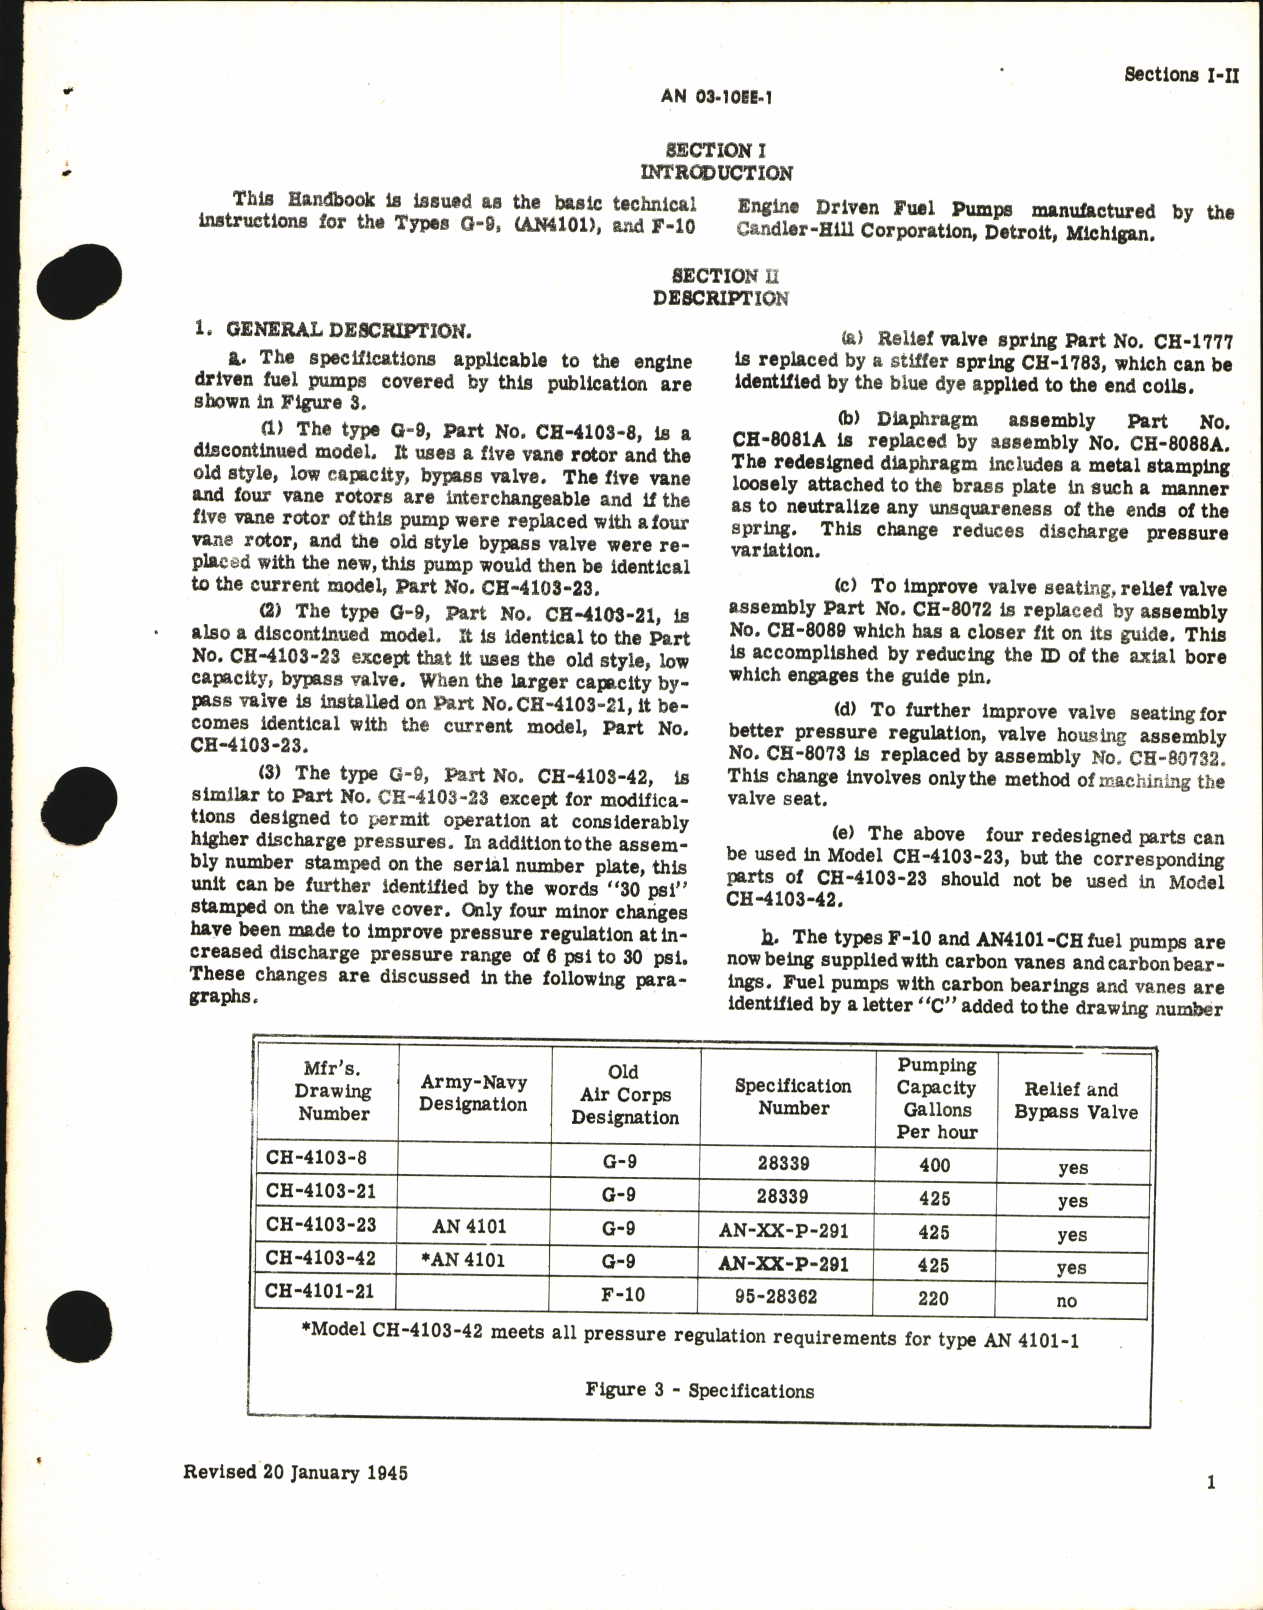 Sample page 5 from AirCorps Library document: Operation, Service, & Overhaul Instructions with Parts Catalog for Engine-Driven Fuel Pumps